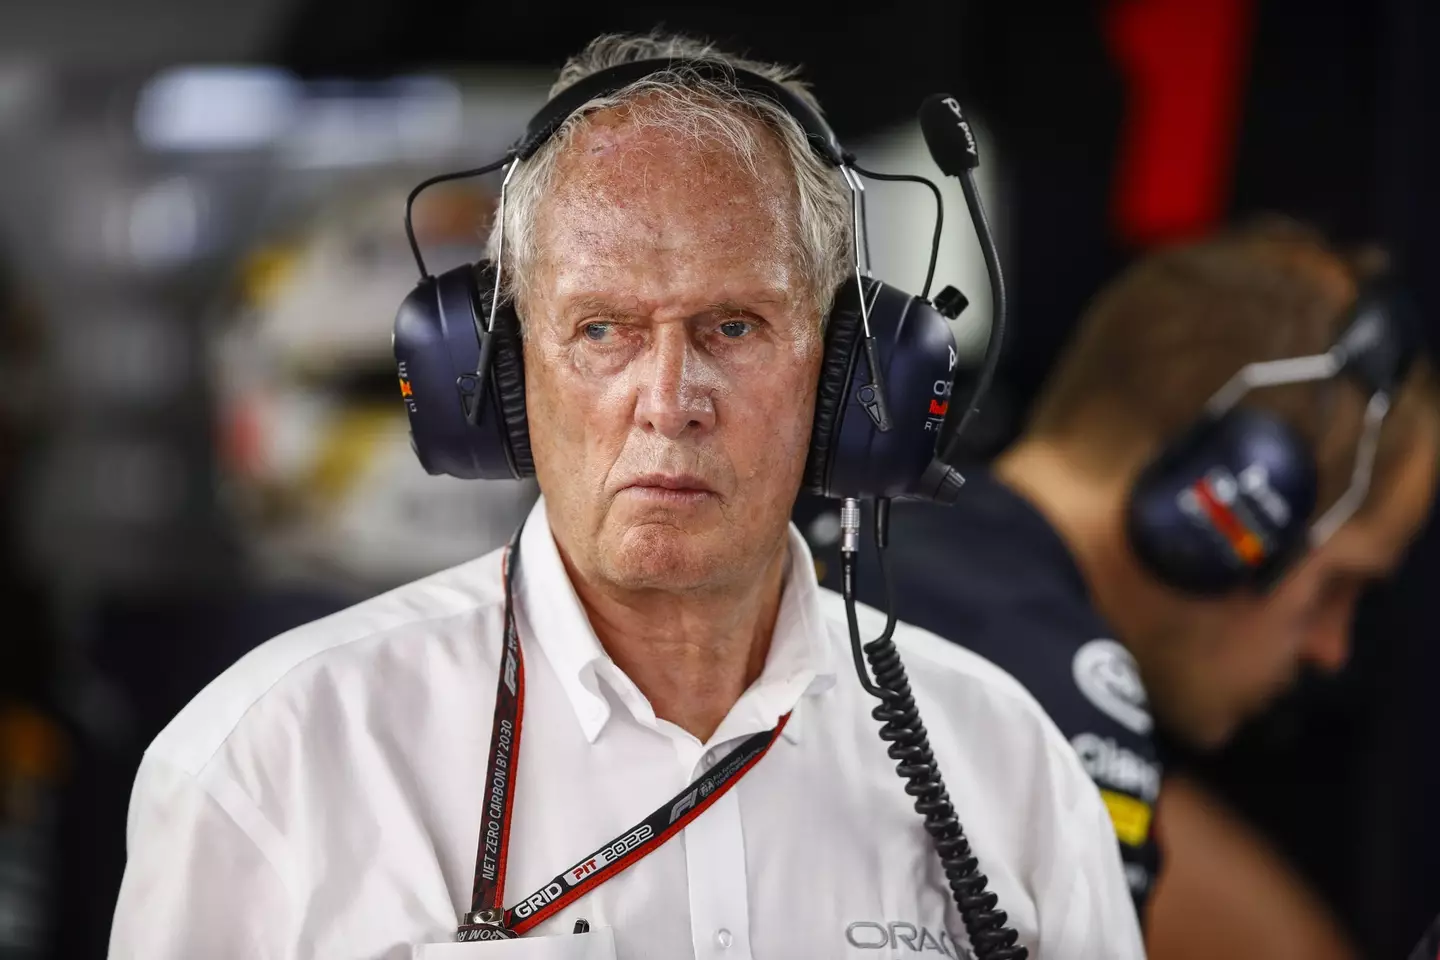 Marko admits he was surprised to see Verstappen crowned champion (Image: Alamy)